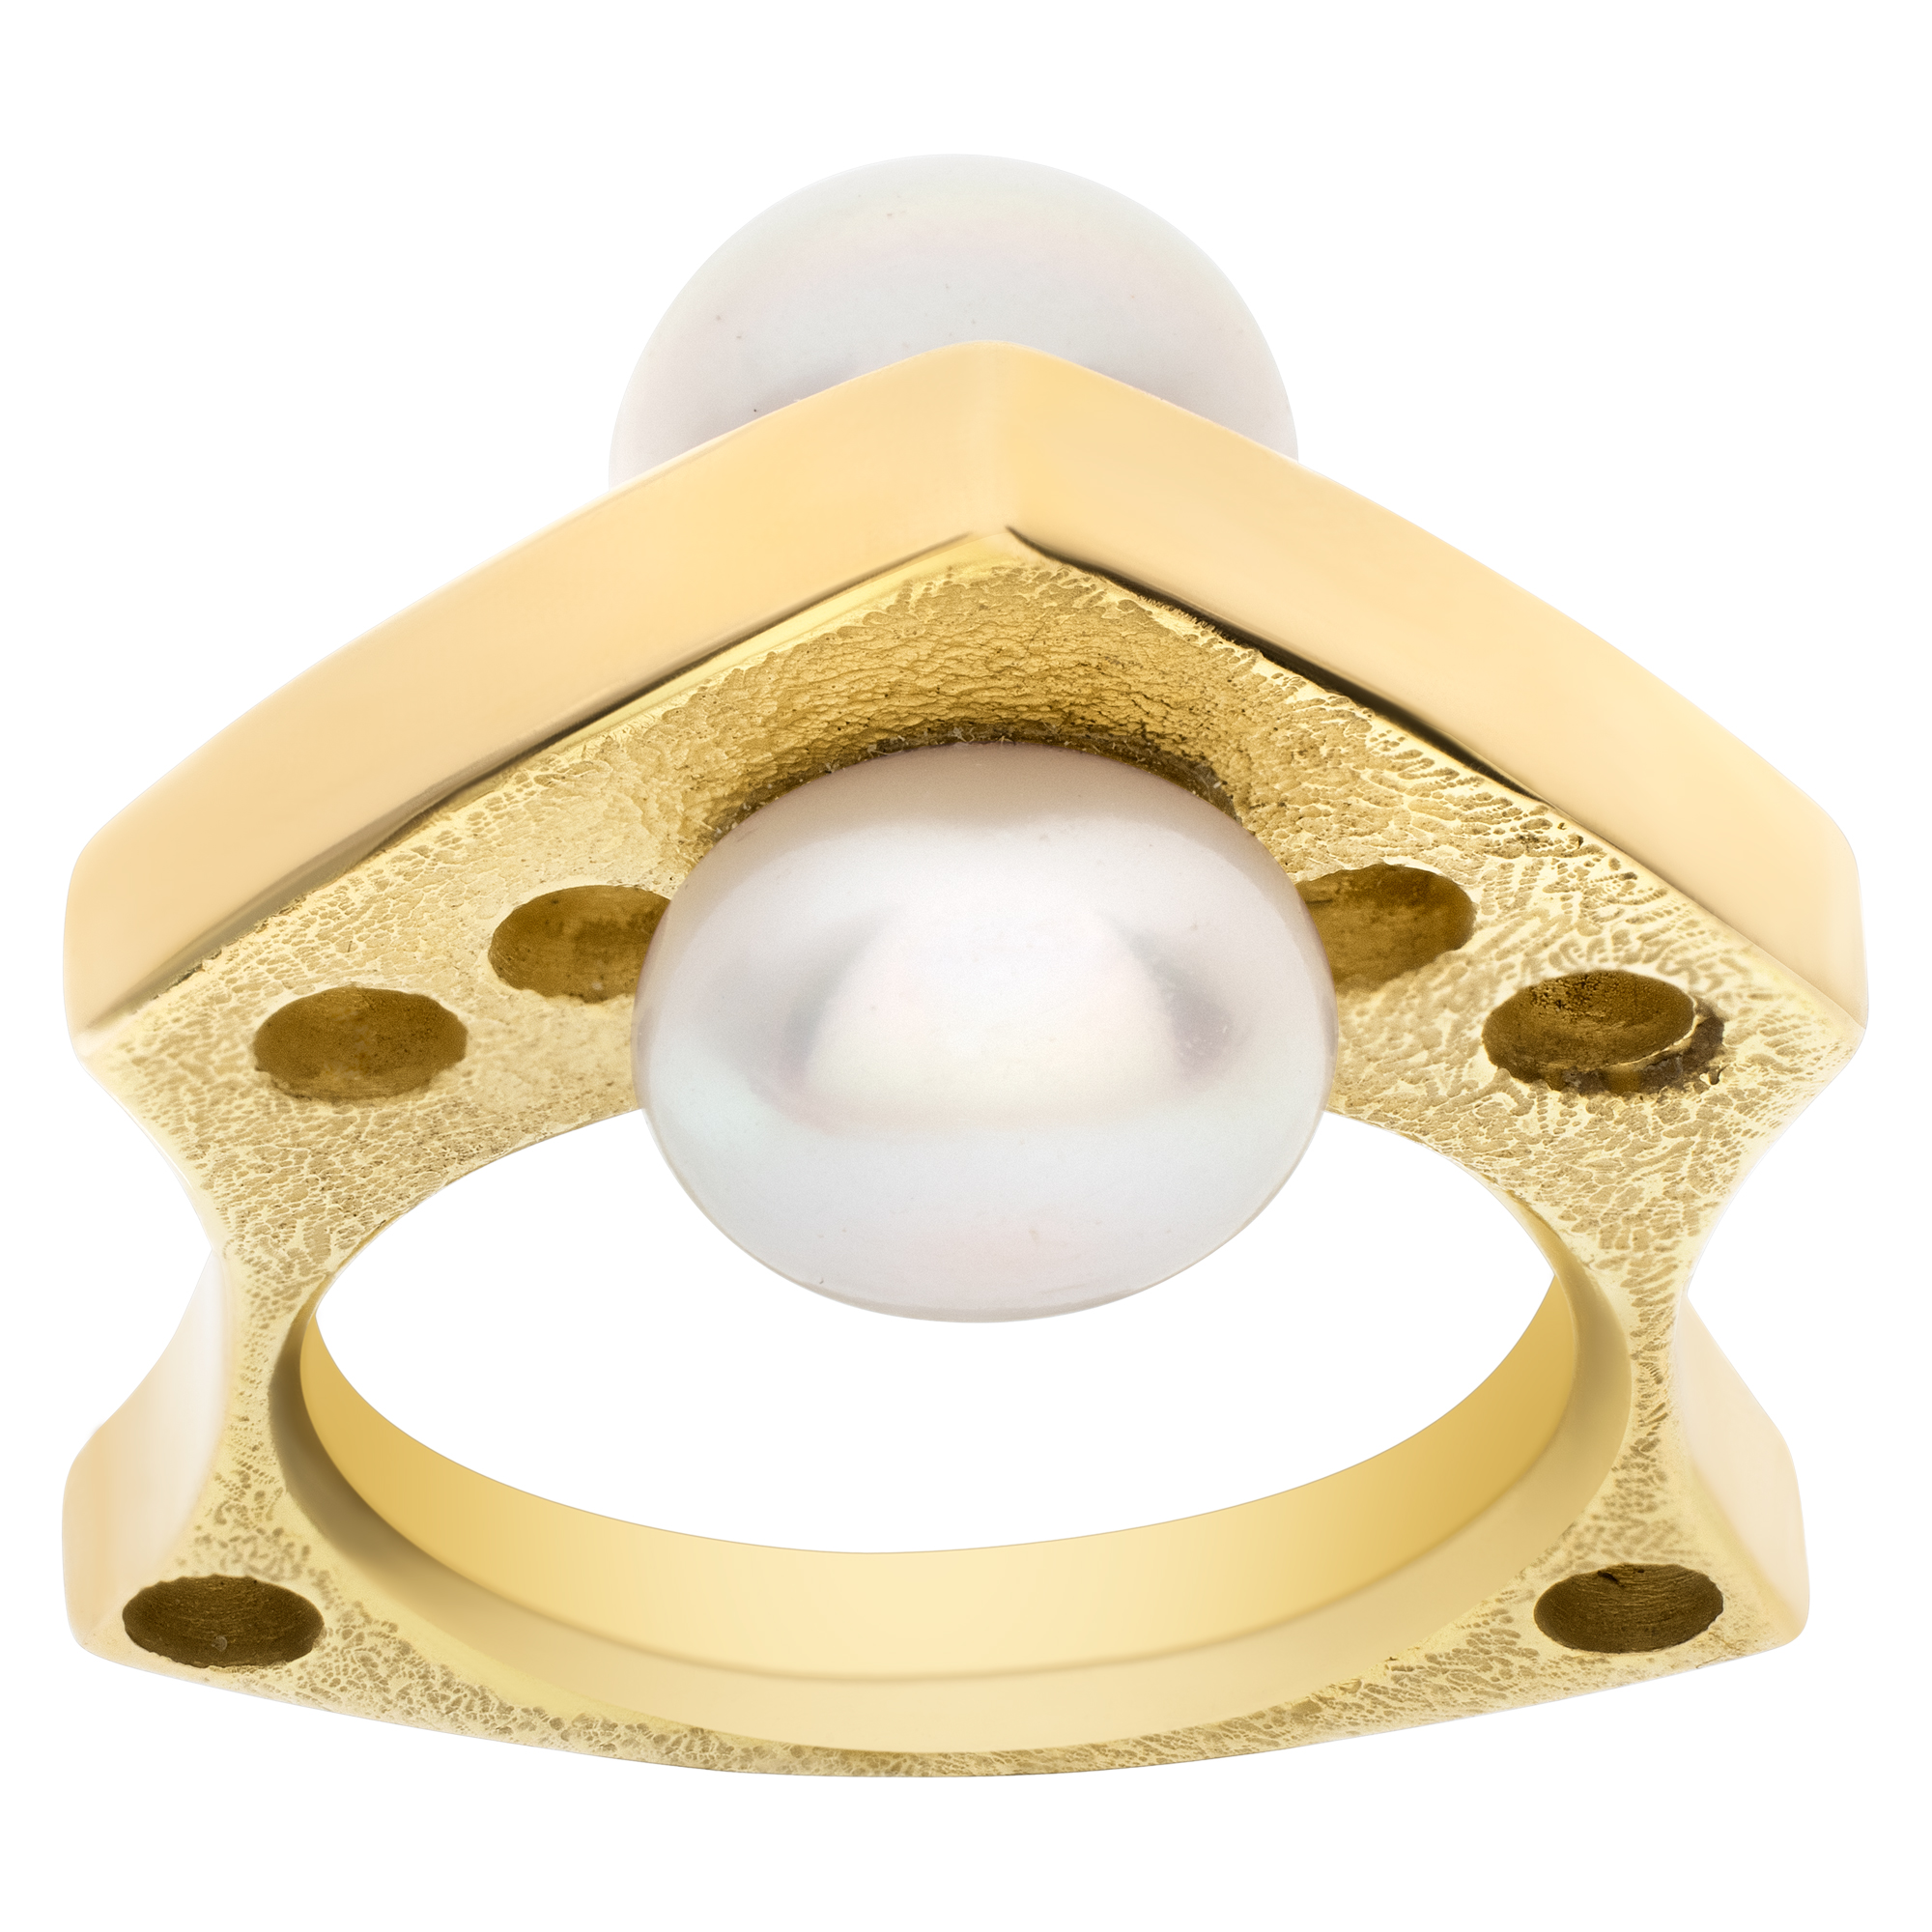 Unqiue Double pearl ring in 14k yellow gold. Size 6.25